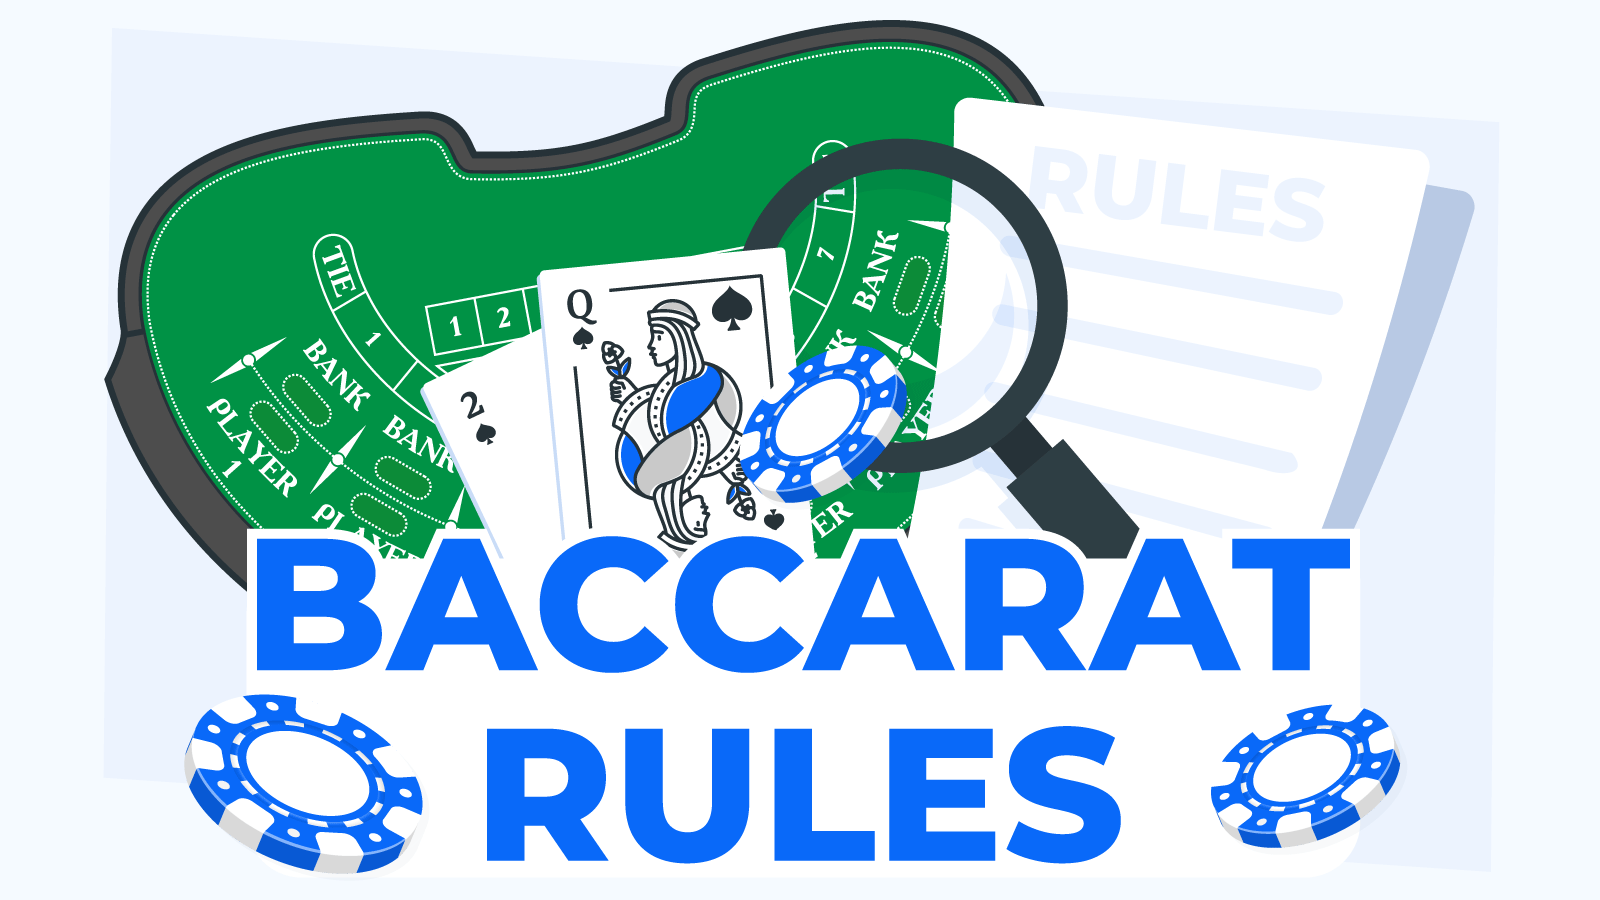 Learn the rules of Baccarat before opening an account